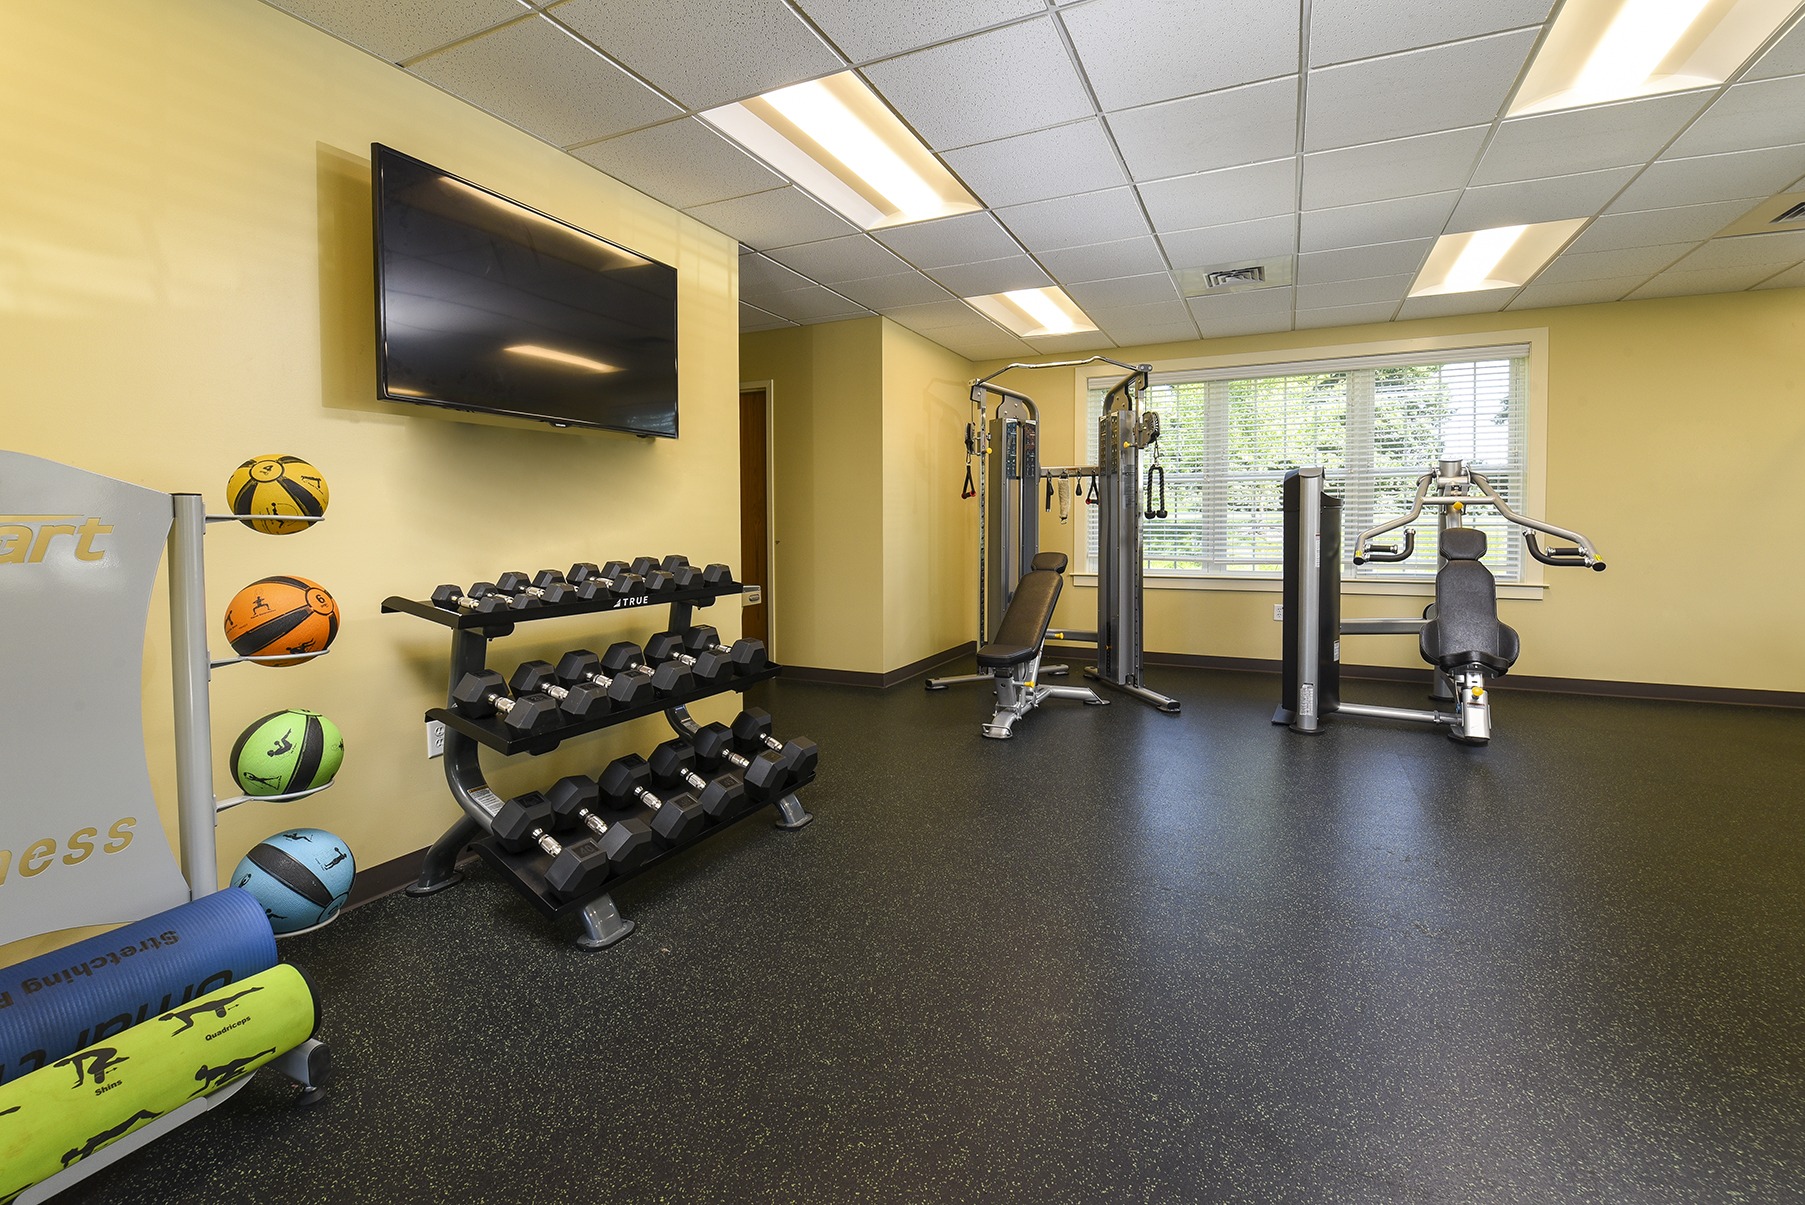 Woodland Plaza's fitness center with dumbbells, exercise balls, weight lifting stations, and a tv on the wall